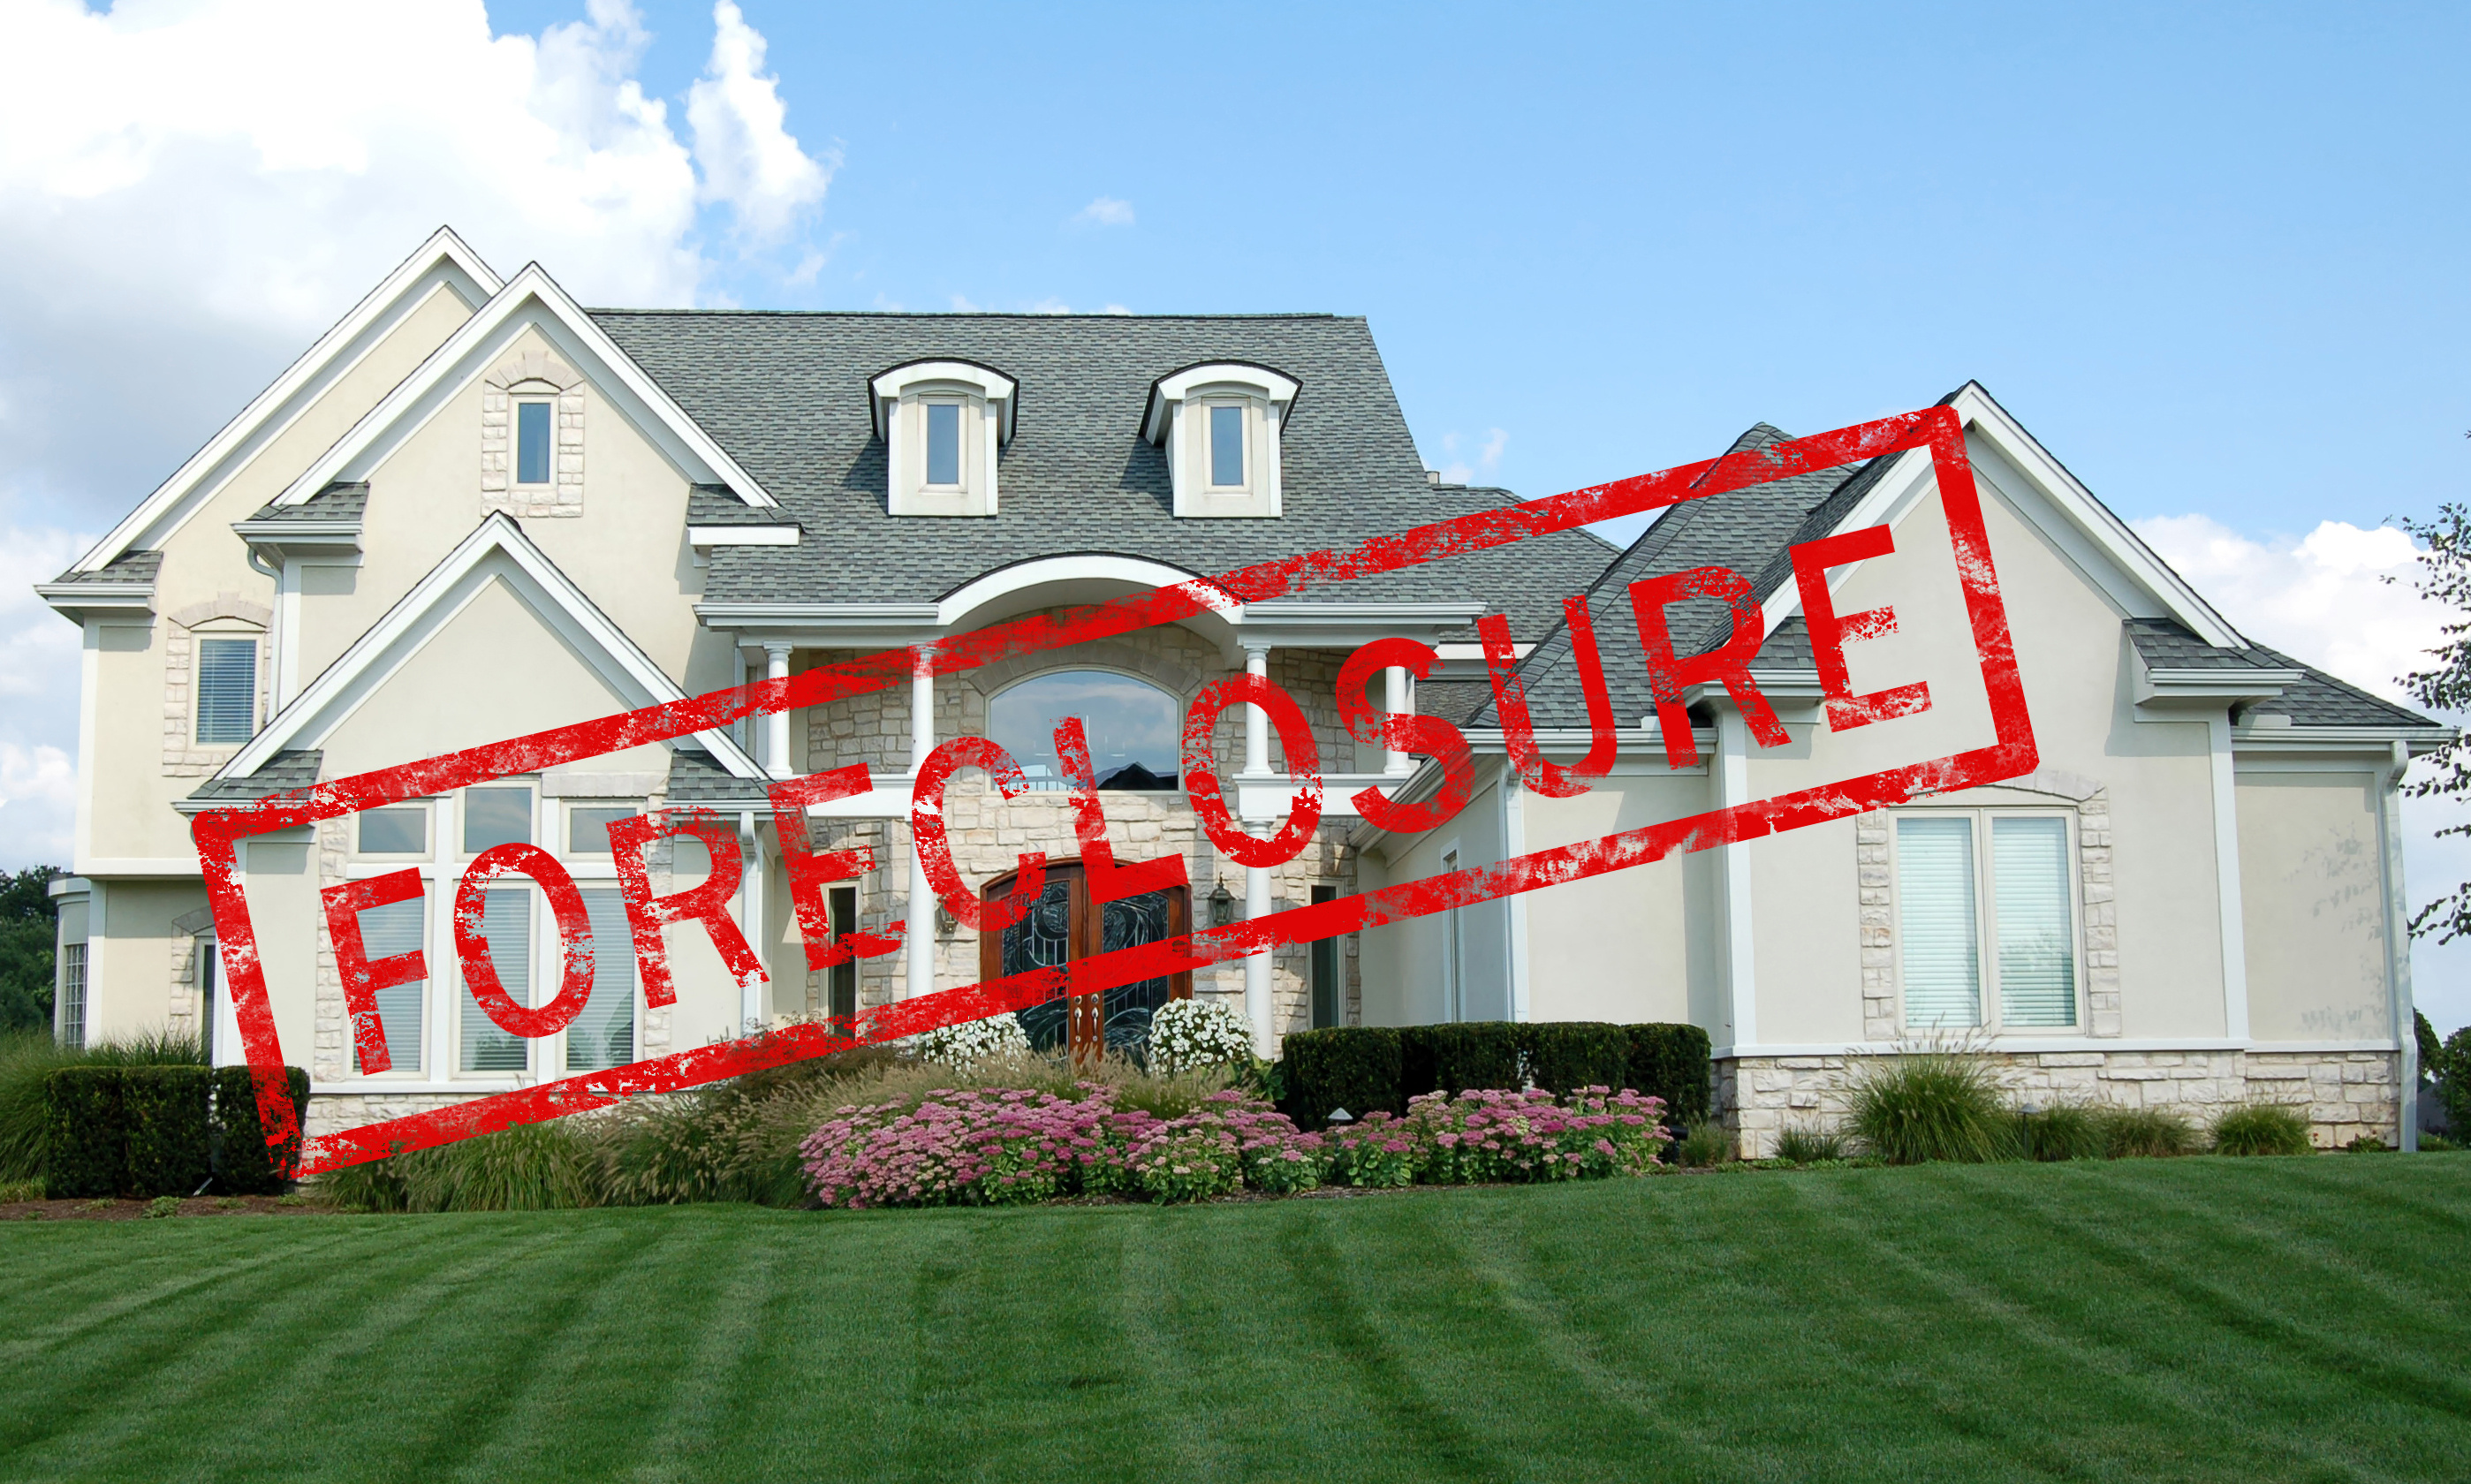 Call Appraisal Associates, LLC when you need appraisals of Madison foreclosures